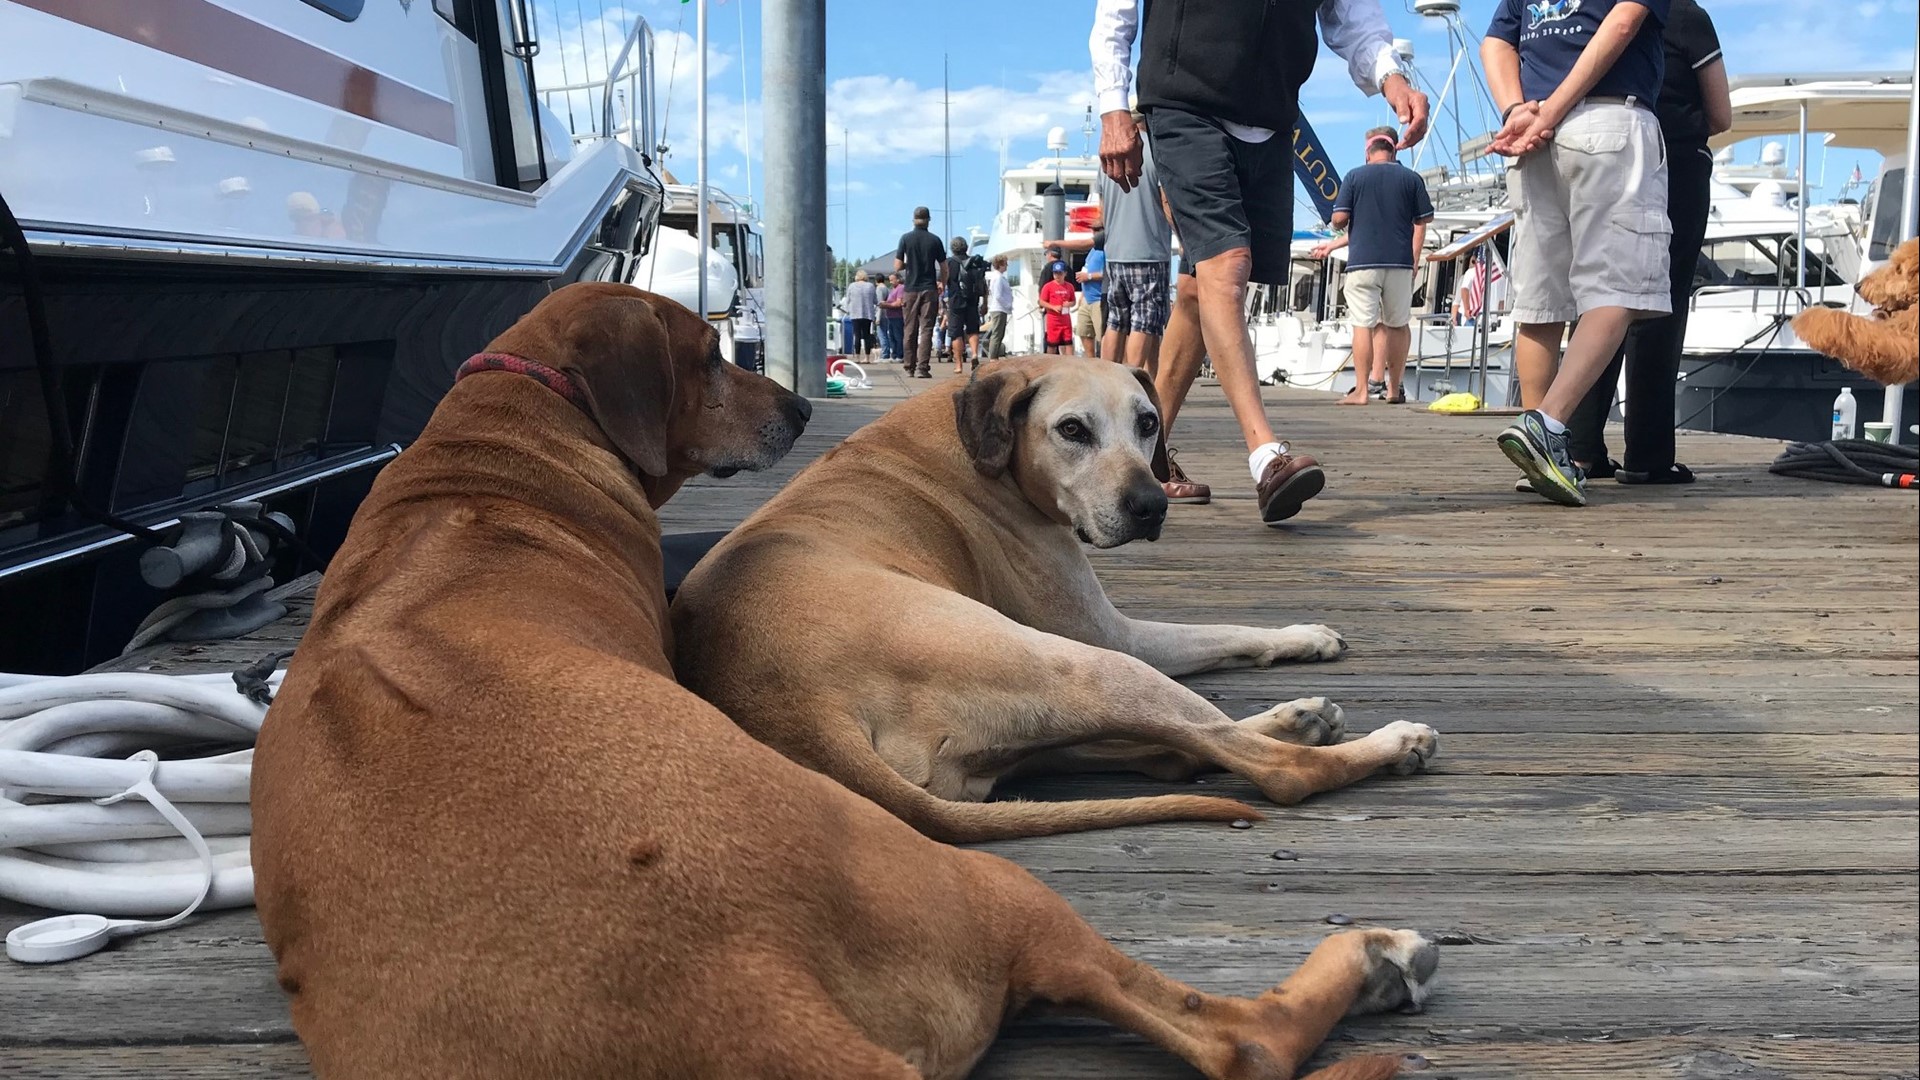 Pirates and pups converge on San Juan Island to celebrate boats that get everyone out on the water. Travel provided by Kenmore Air.